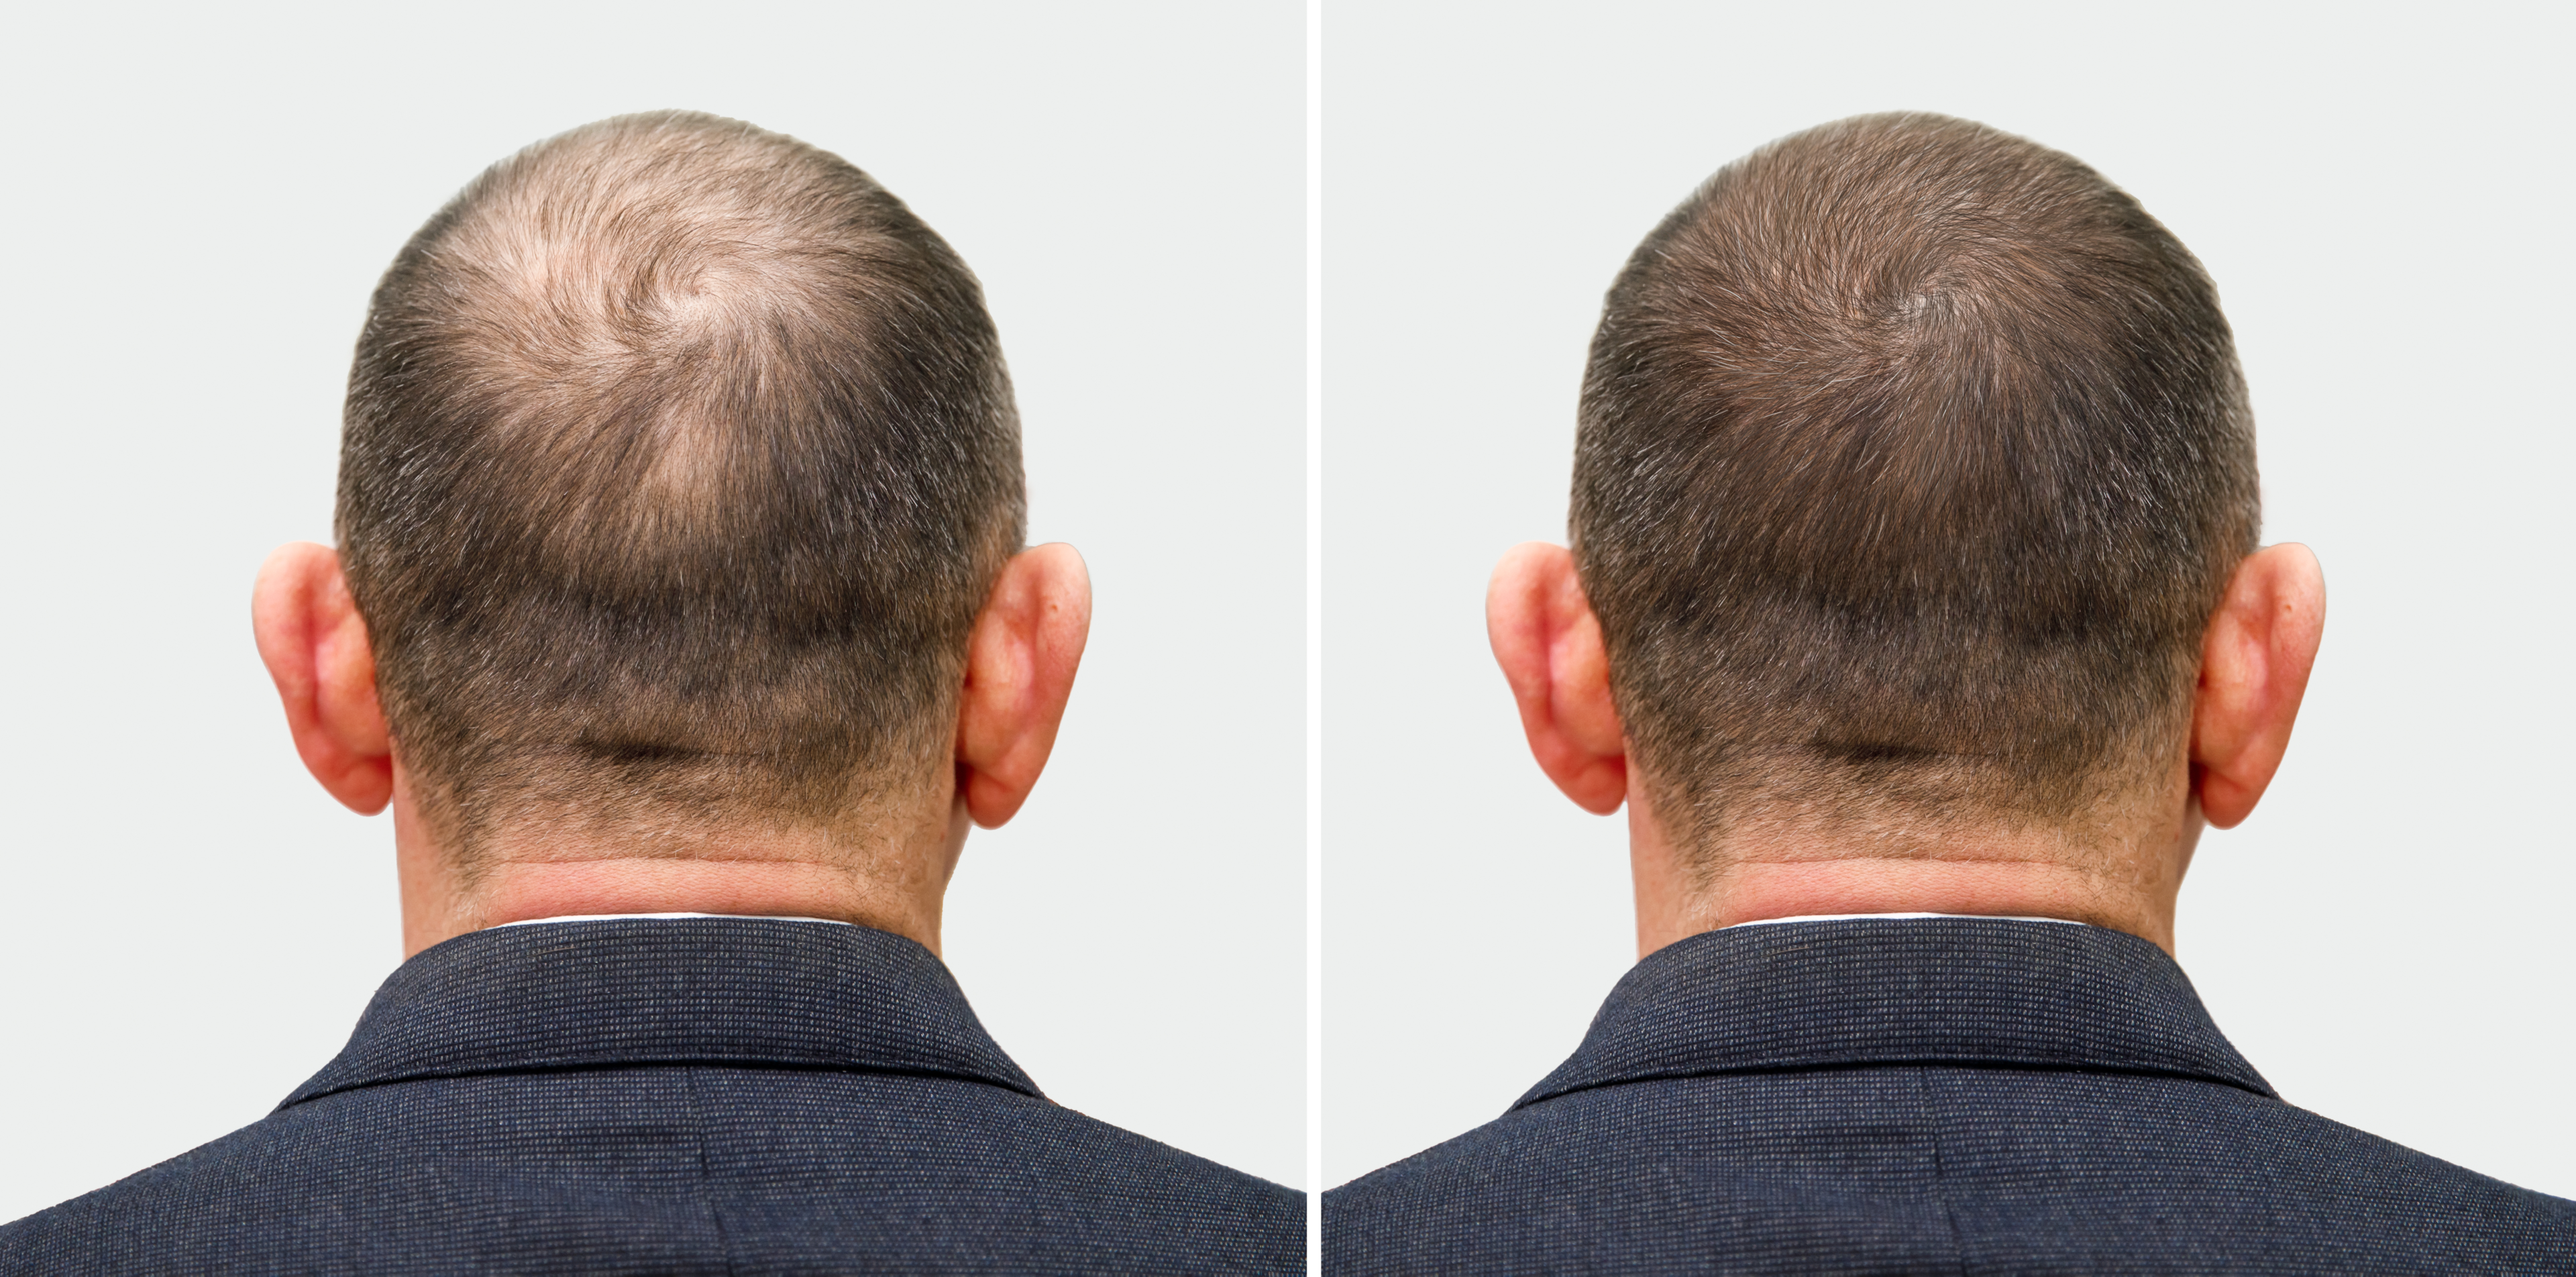 Hair loss treatments take time to work.